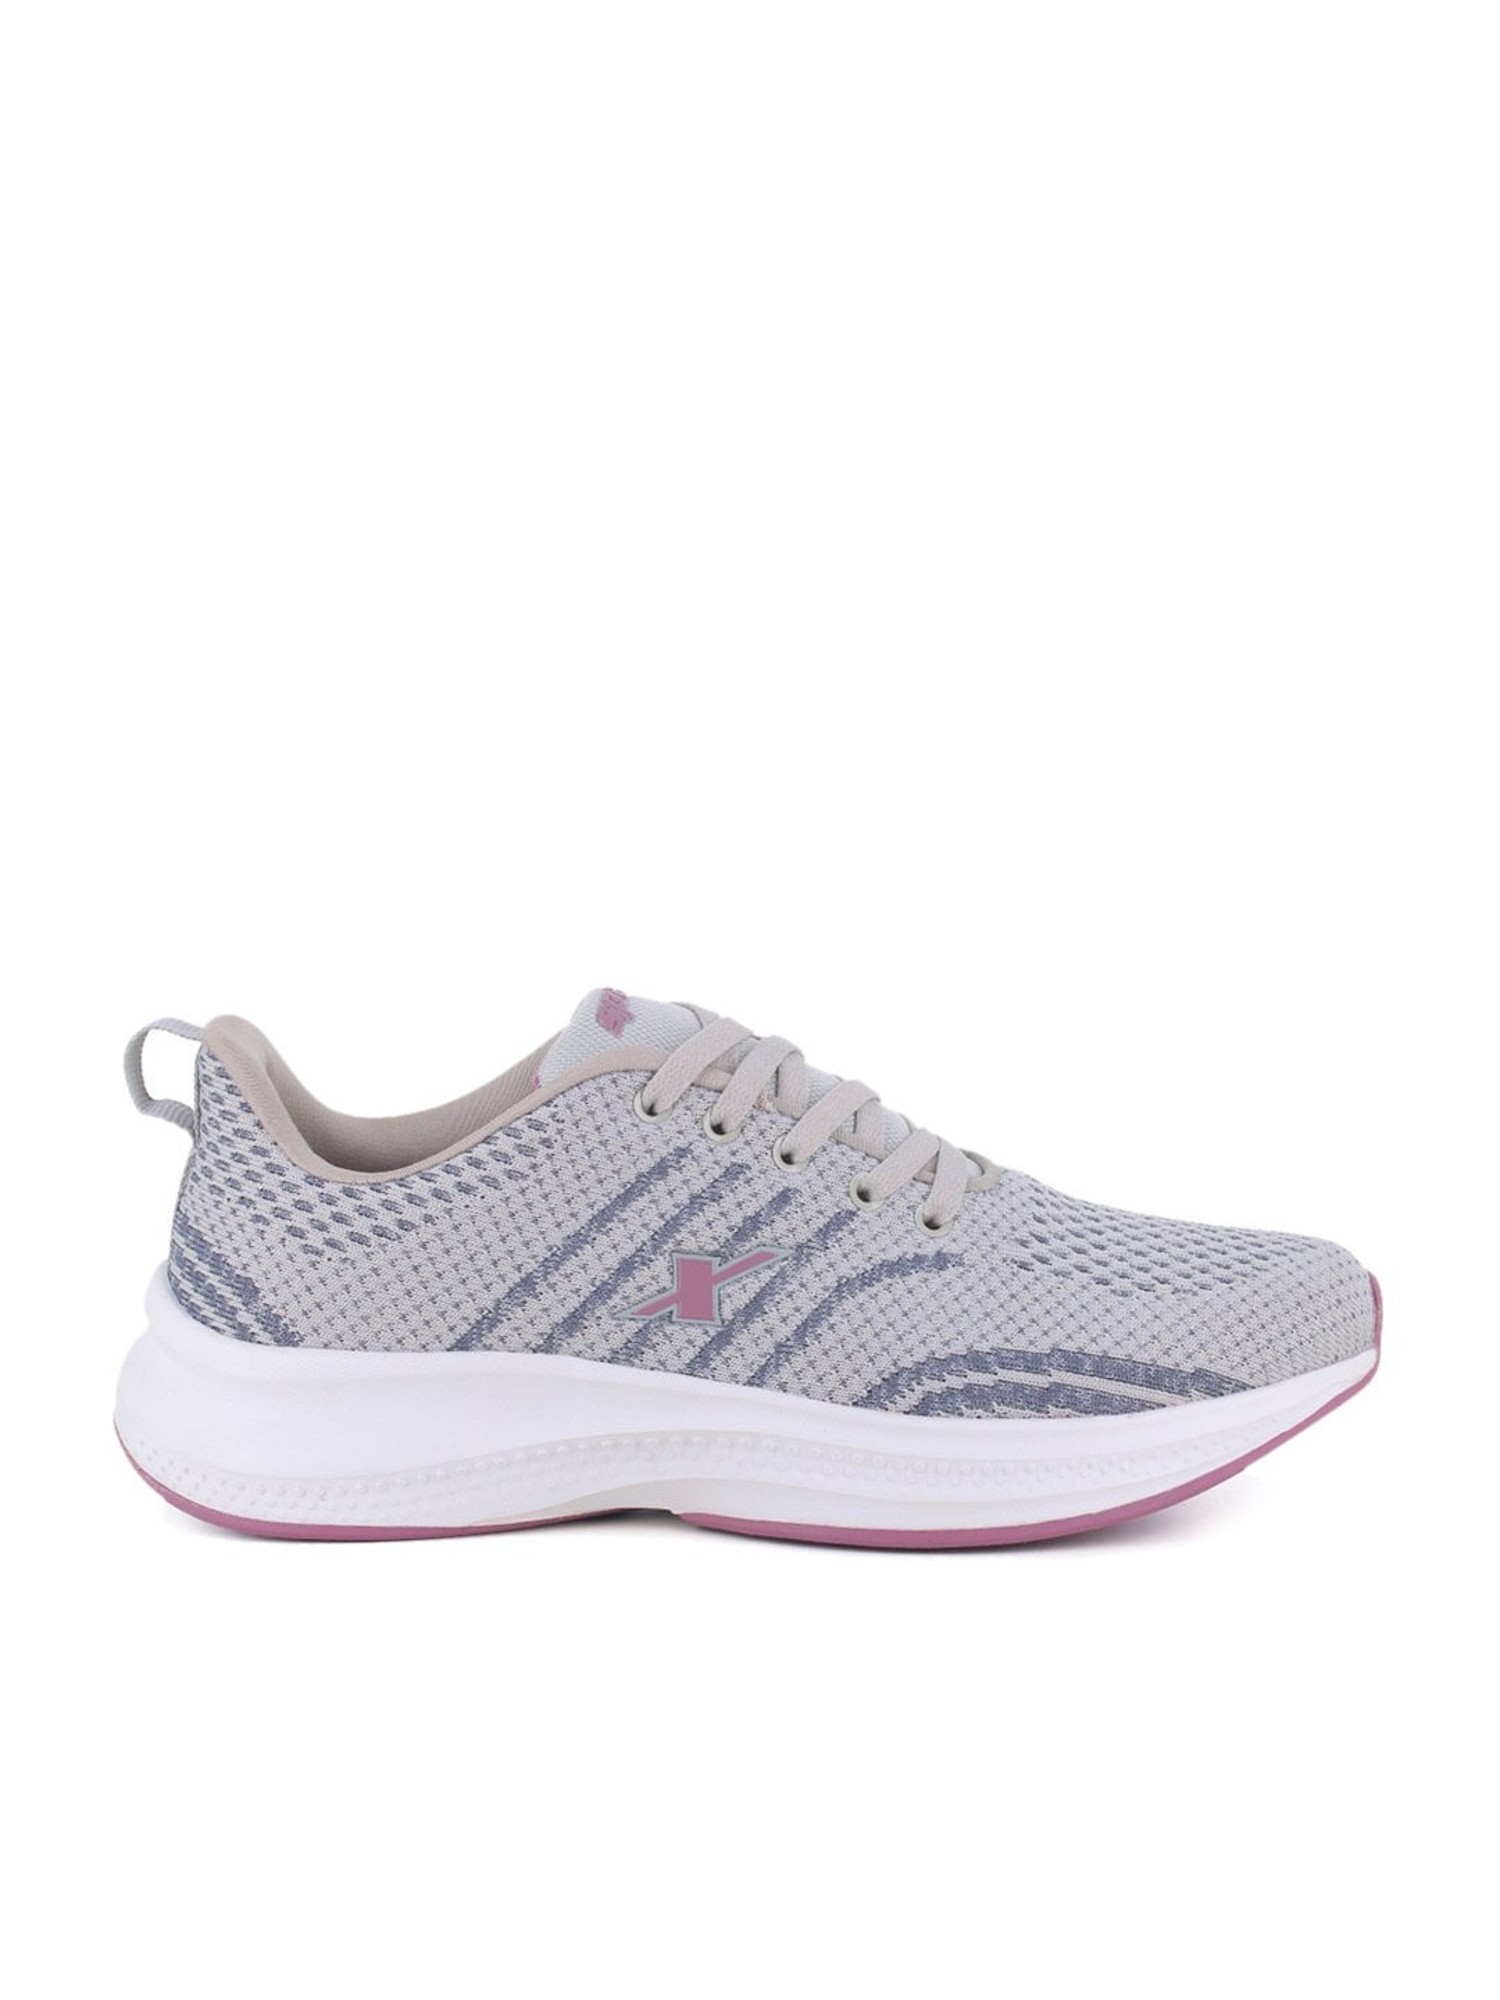 Buy Black Sports Shoes for Women by SPARX Online | Ajio.com